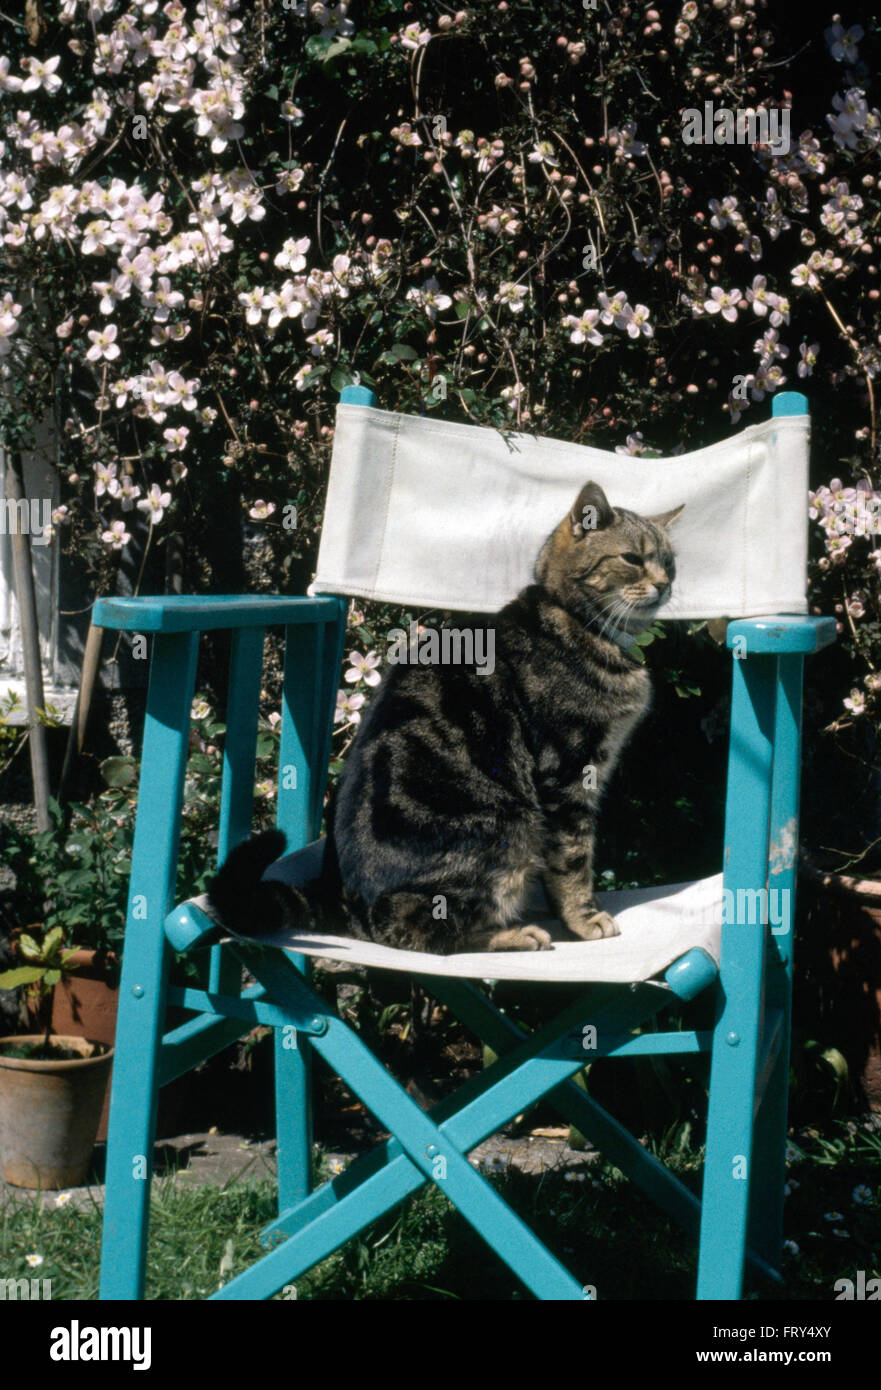 Tabby cat sitting on painted director's chair against pink clematis Stock Photo